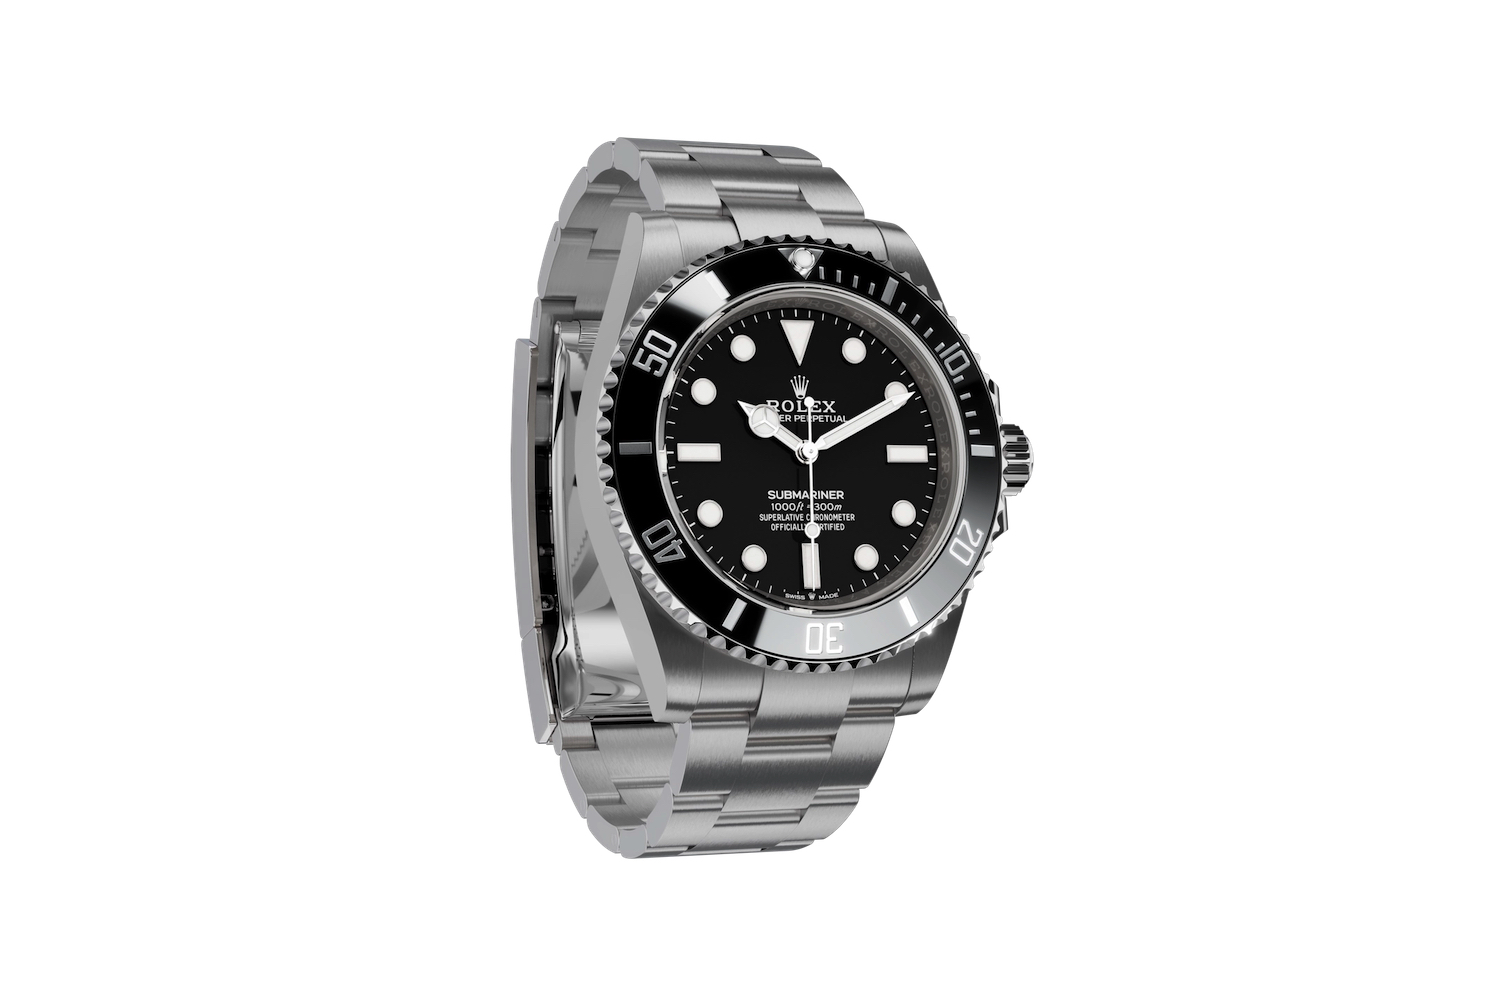 A promotional image of the Rolex Submariner watch.